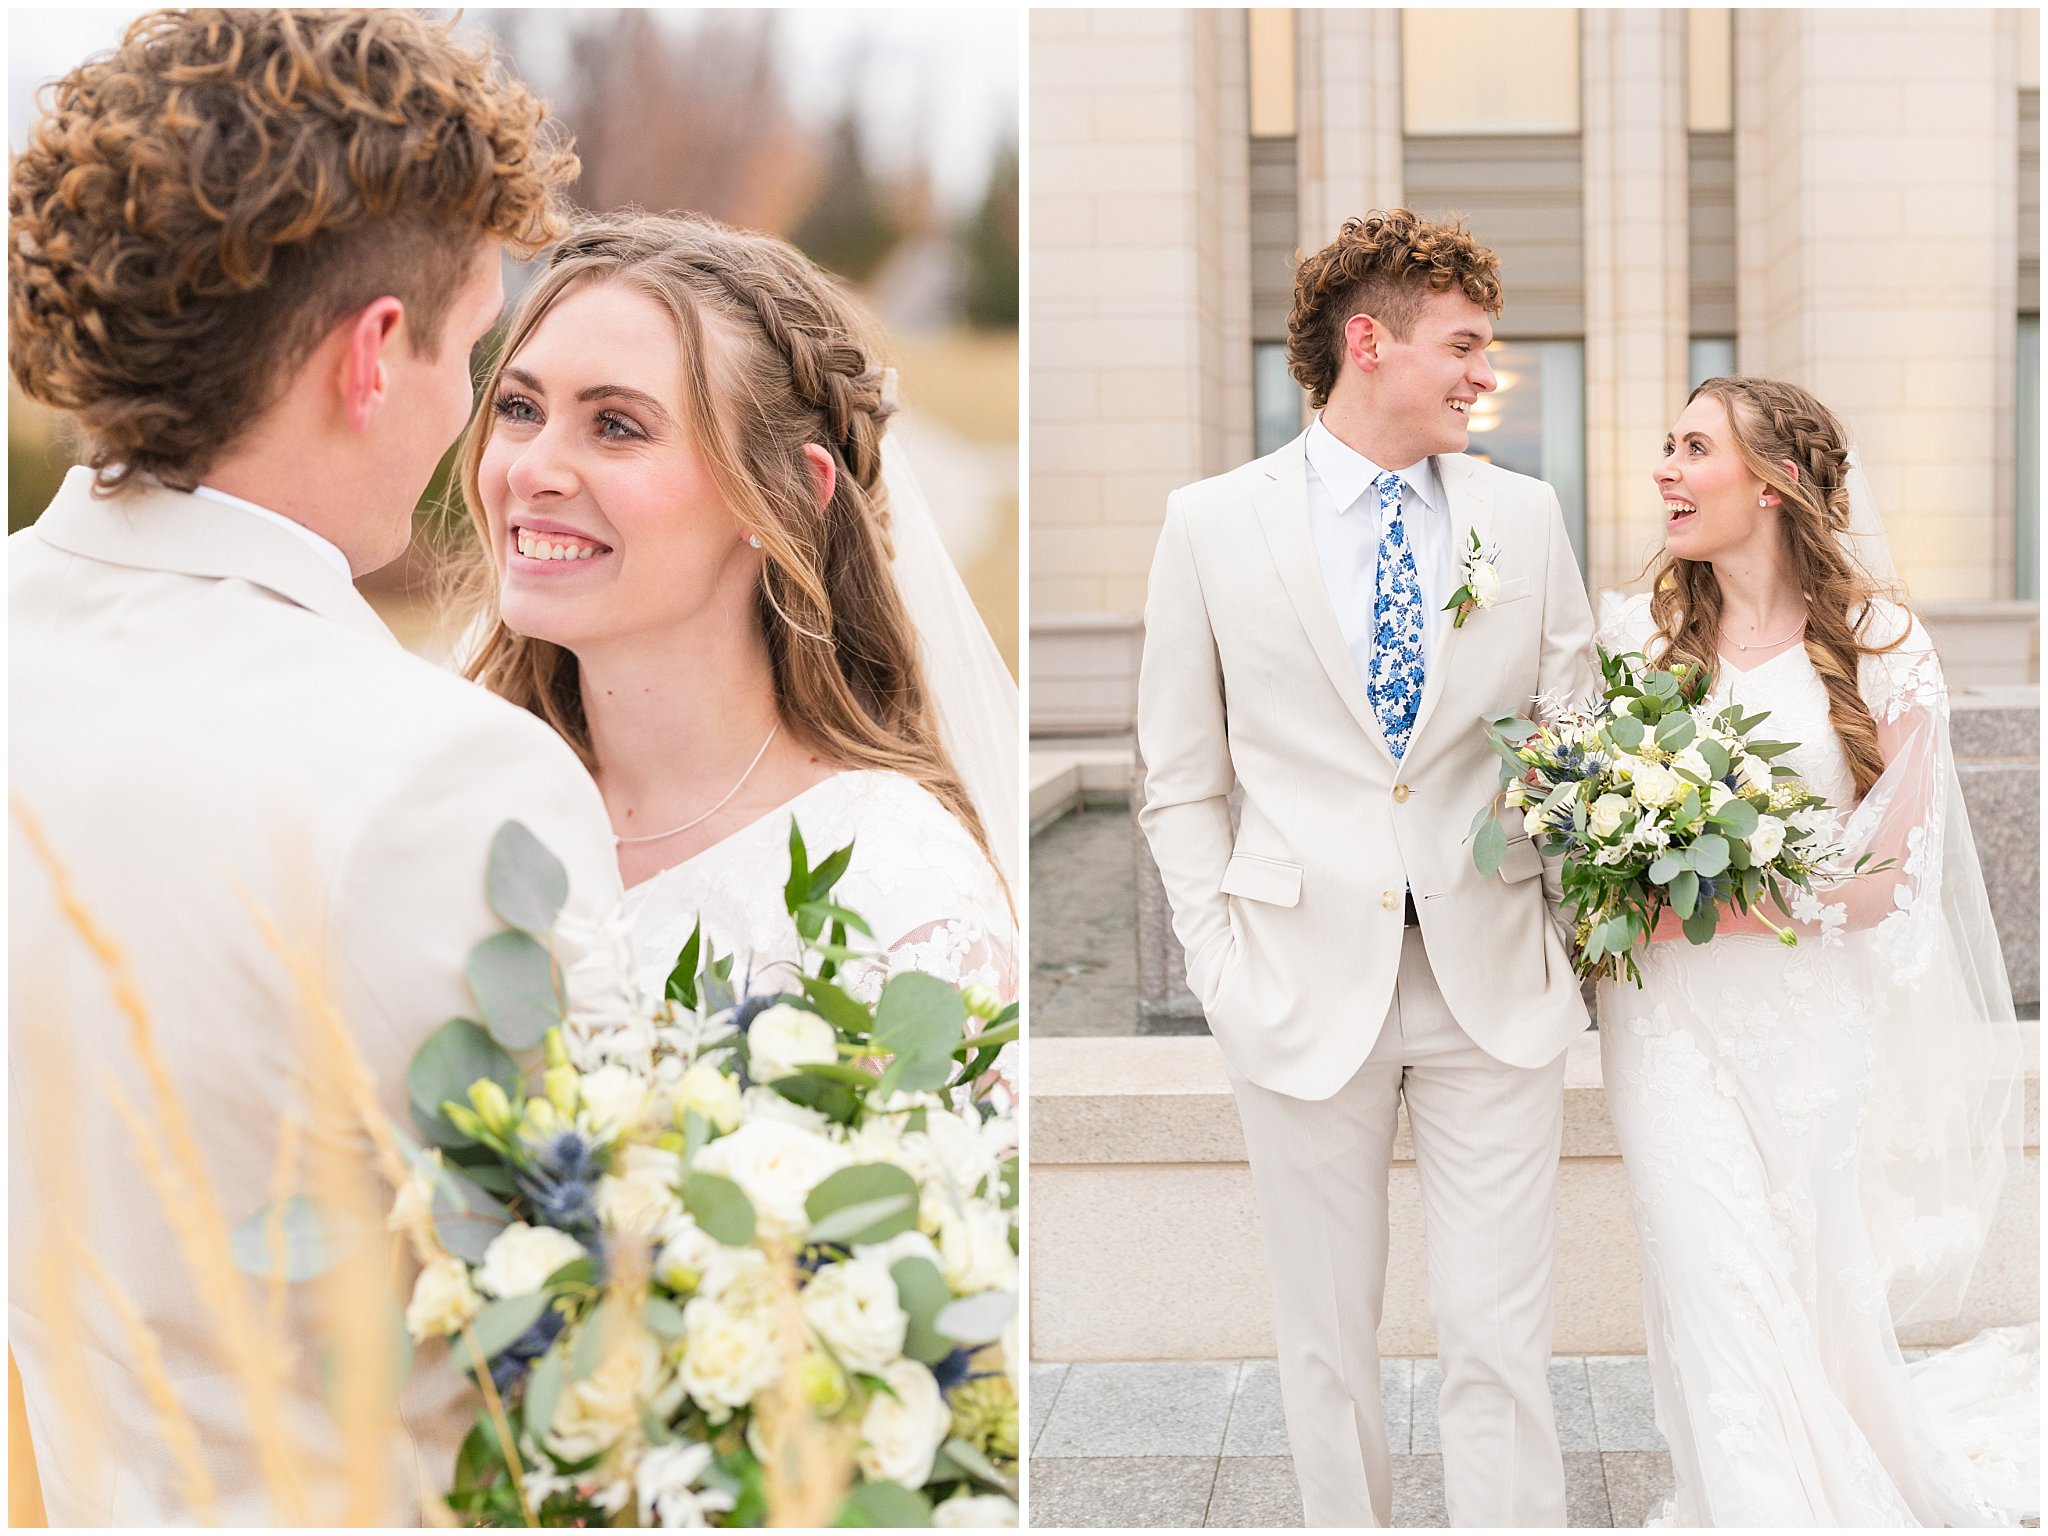 Bride and groom portraits at the temple. Groom in cream colored suit with blue floral tie and bride with lace dress and white floral bouquet. | Oquirrh Mountain Temple and Draper Day Barn Winter Wedding | Jessie and Dallin Photography